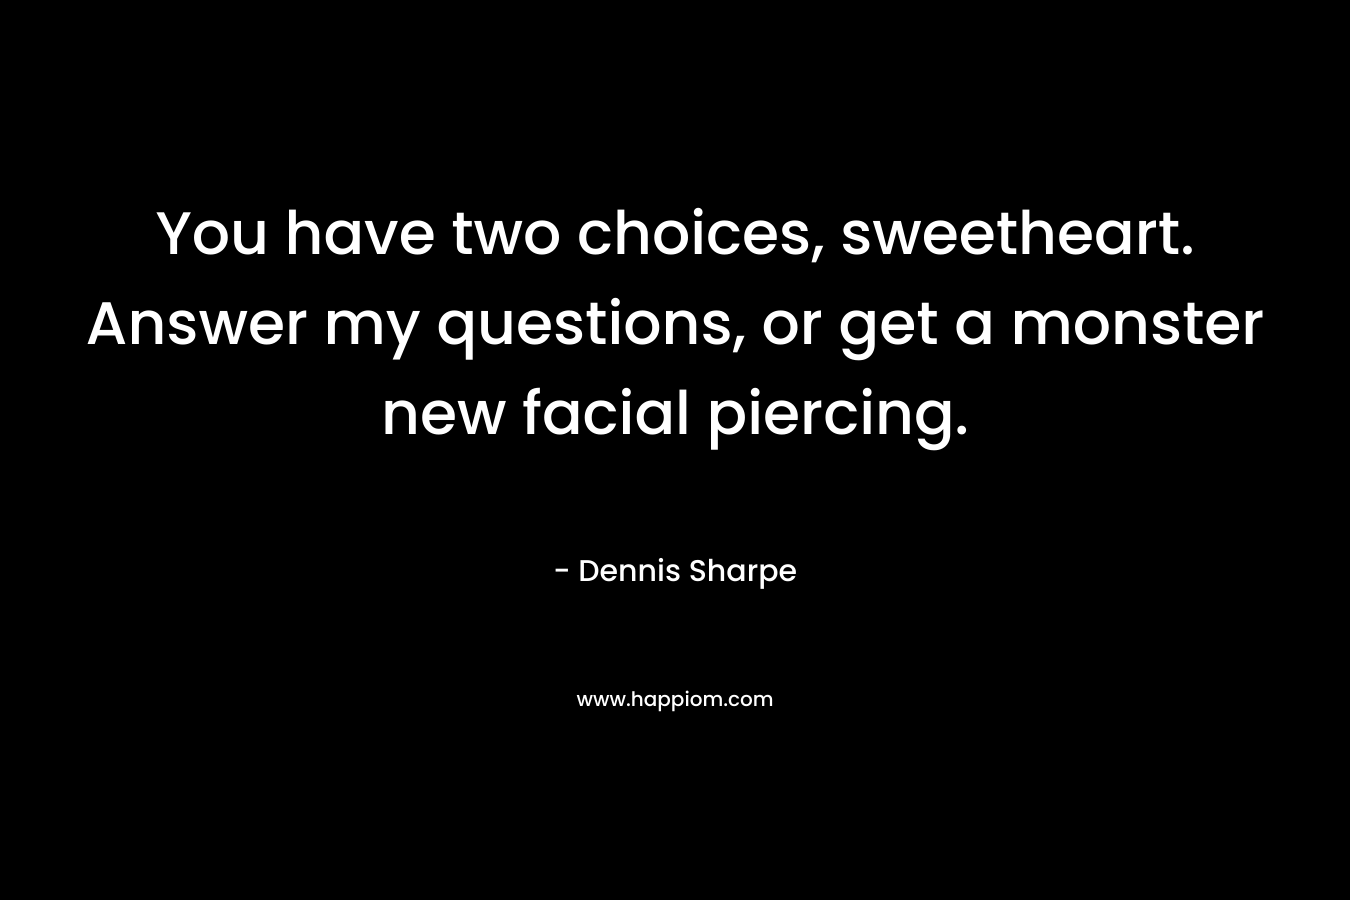 You have two choices, sweetheart. Answer my questions, or get a monster new facial piercing. – Dennis Sharpe